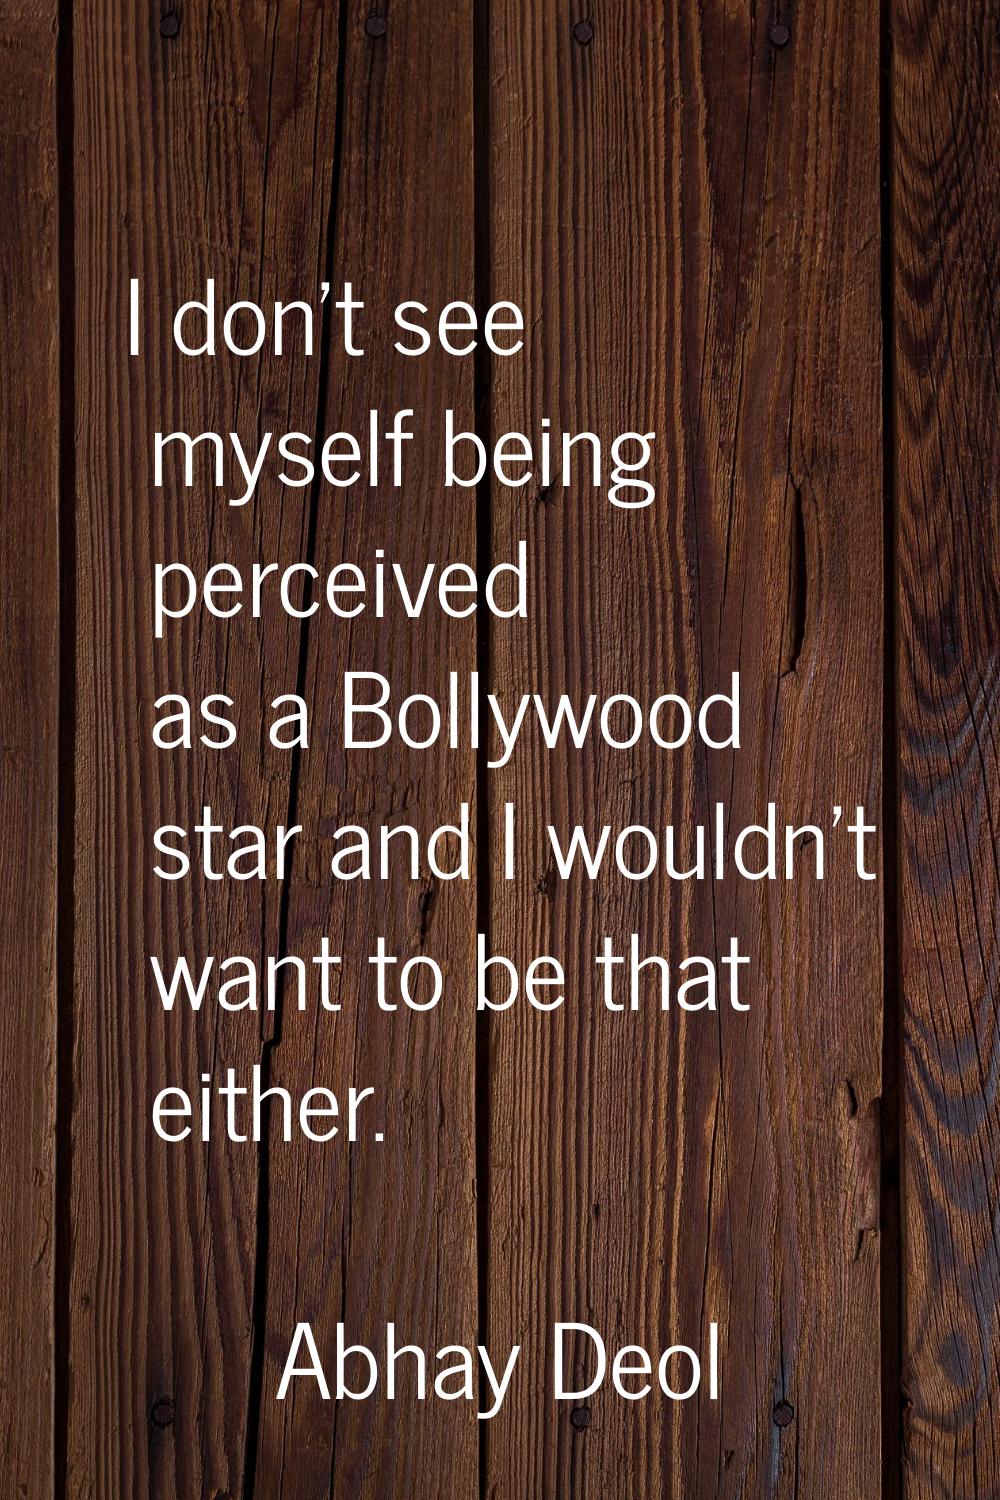 I don't see myself being perceived as a Bollywood star and I wouldn't want to be that either.